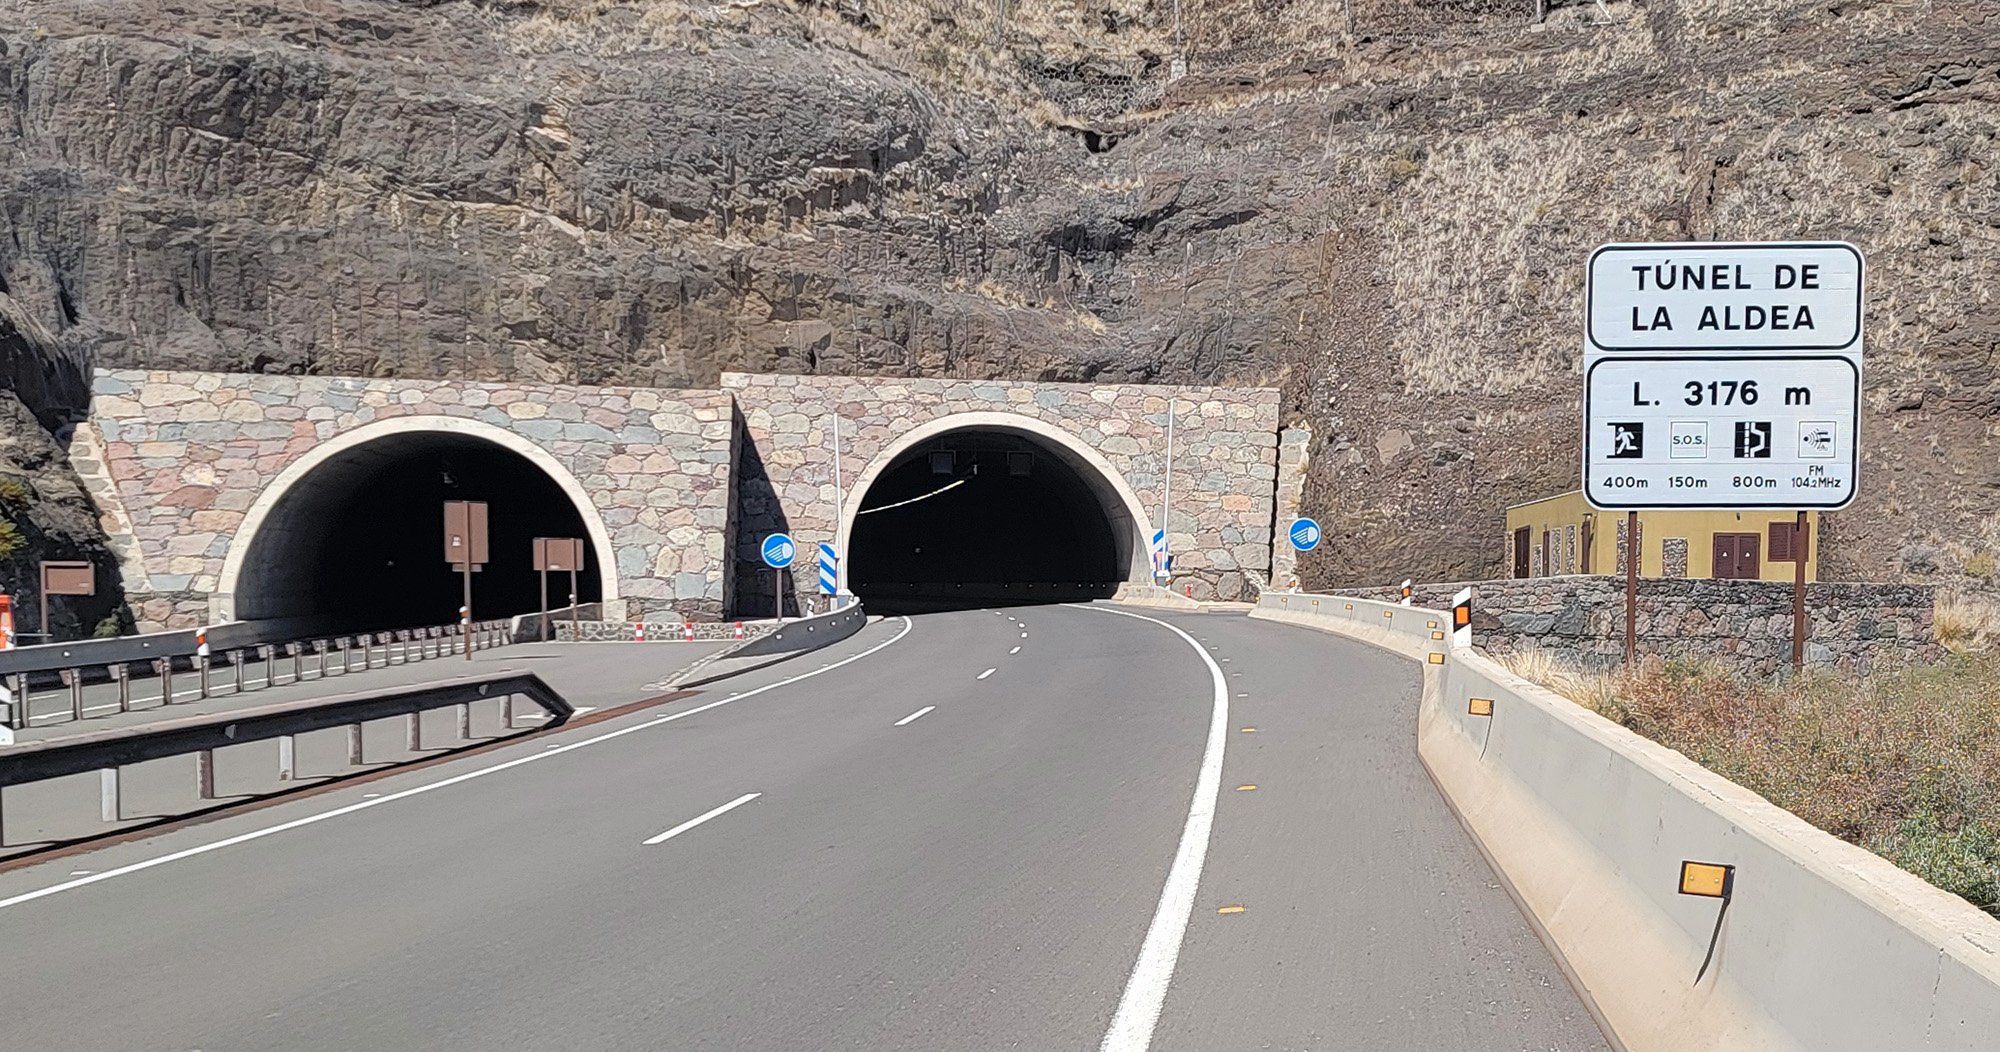 Oh no, not tunnels. I didn't know what was in stores for me on Gran Canaria.